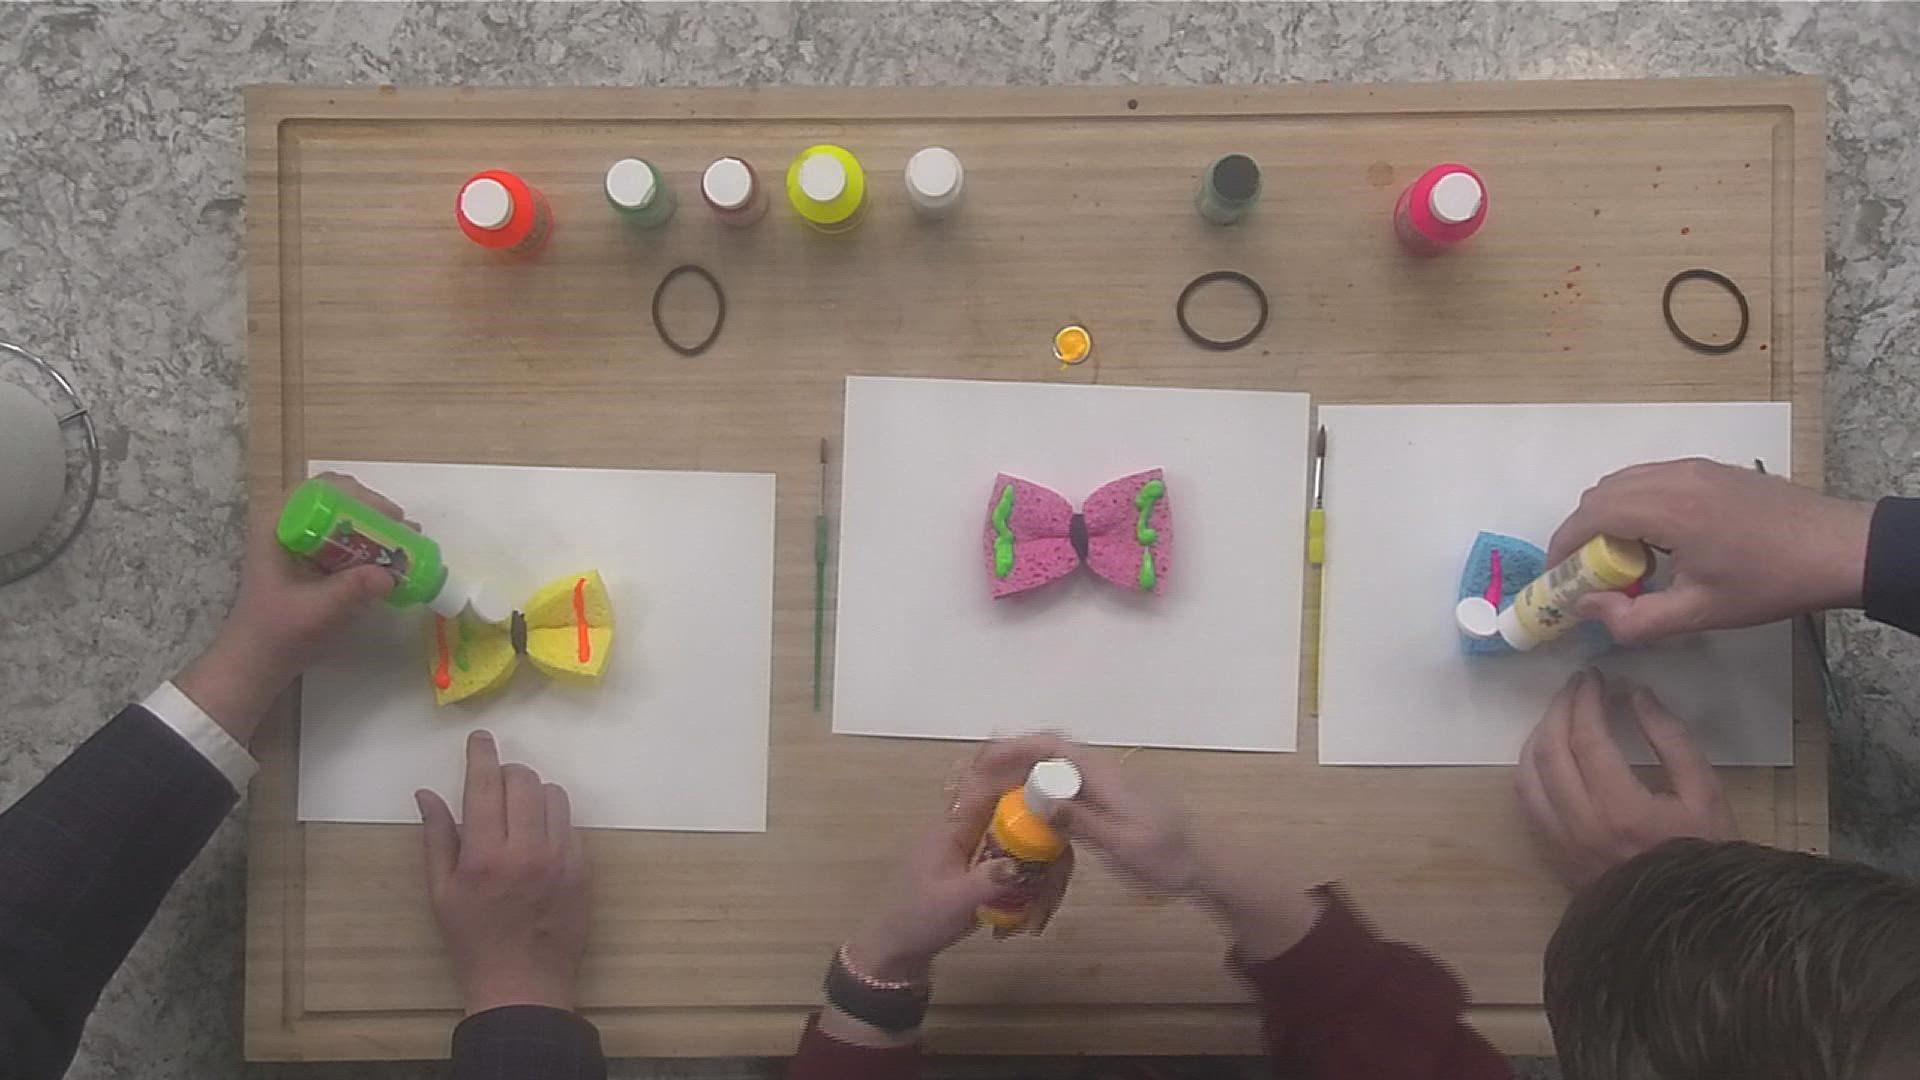 You can make a beautiful butterfly with just a sponge and some paint!